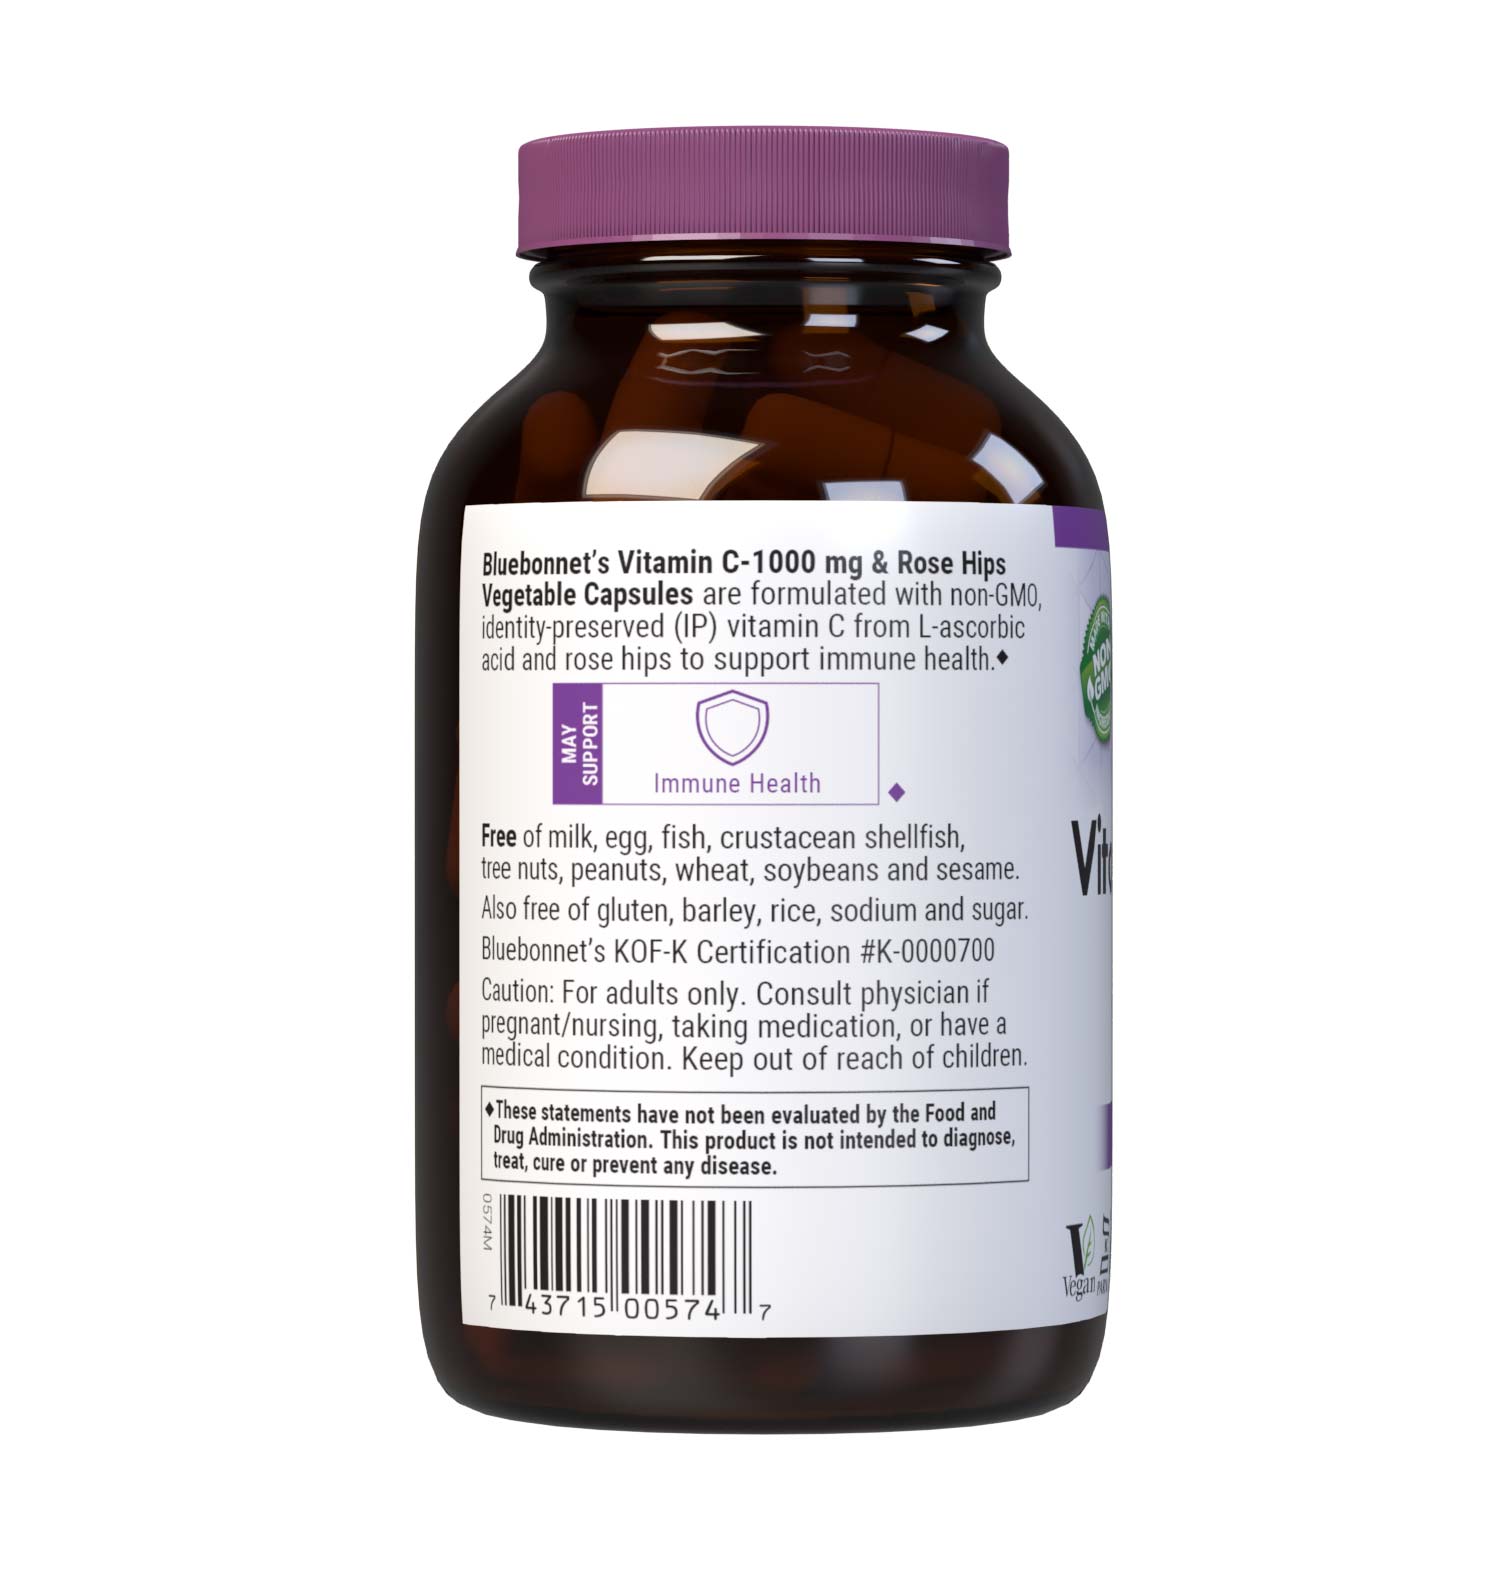 Bluebonnet’s Vitamin C-1000 mg & Rose Hips 90 Vegetable Capsules are formulated with non-GMO, identity preserved (IP) vitamin C from L-ascorbic acid and rose hips to help support immune function. Description panel. #size_90 count